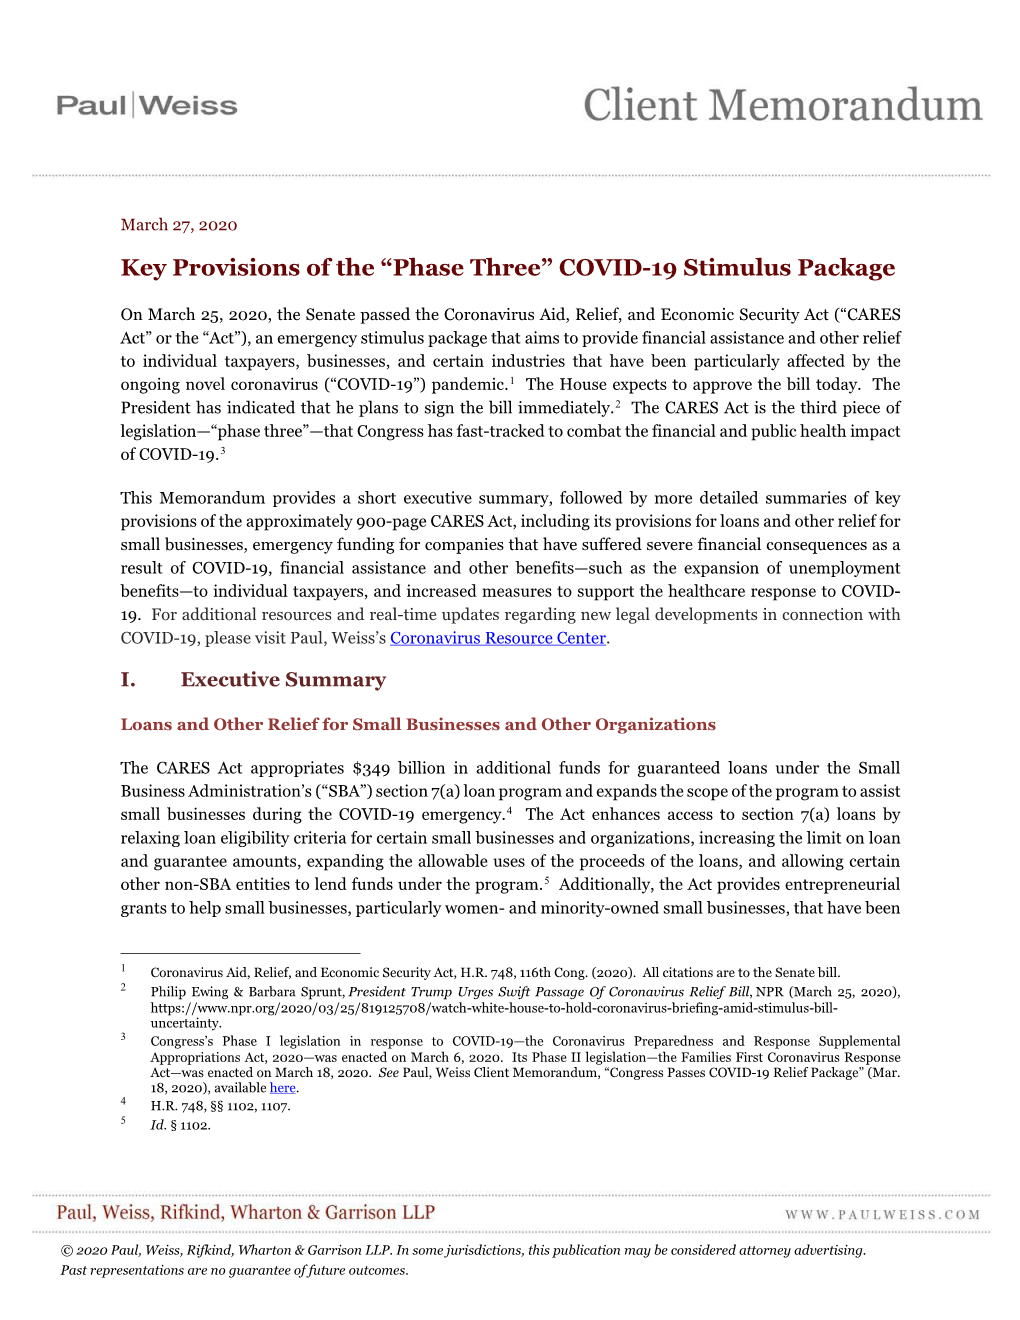 Key Provisions of the “Phase Three” COVID-19 Stimulus Package